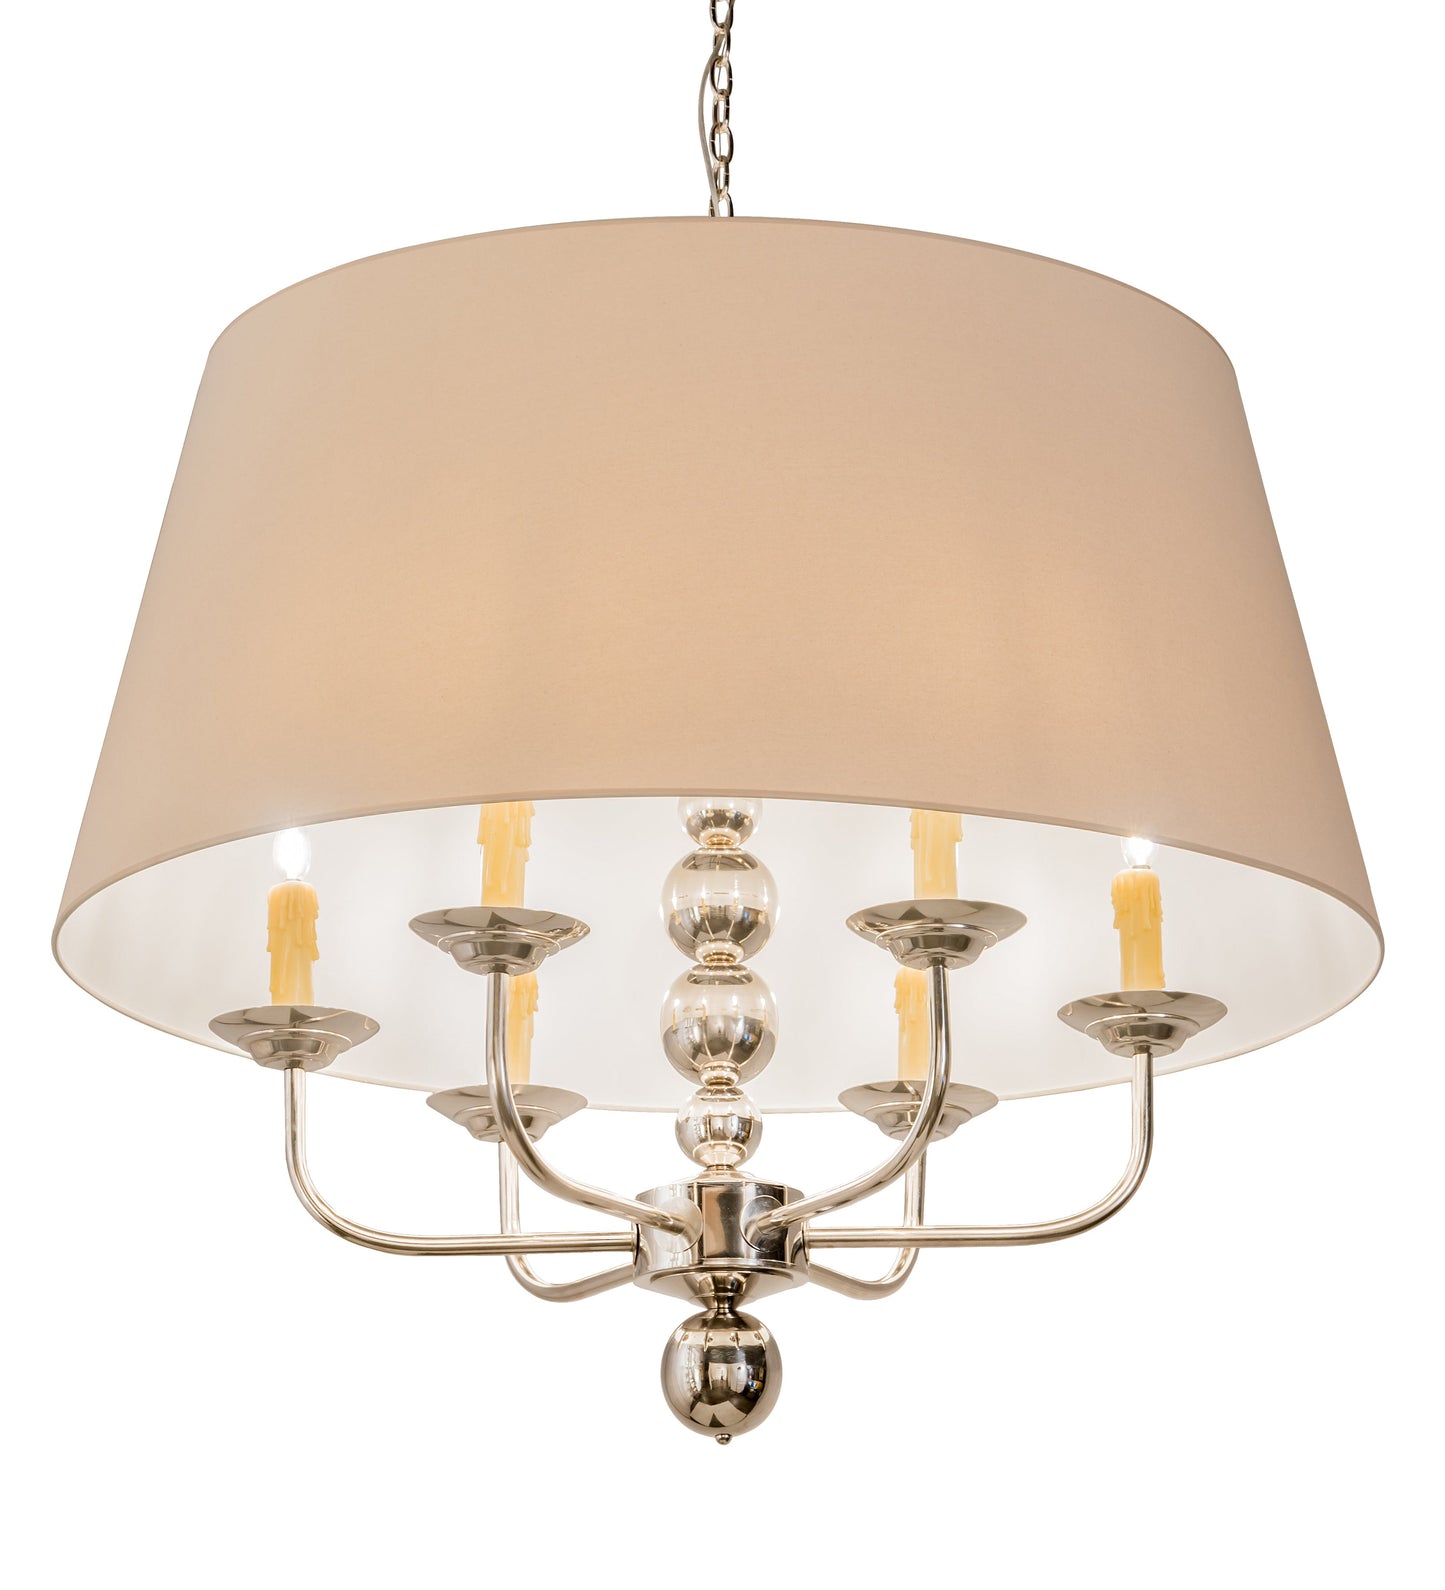 38" Biscayne Pendant by 2nd Ave Lighting